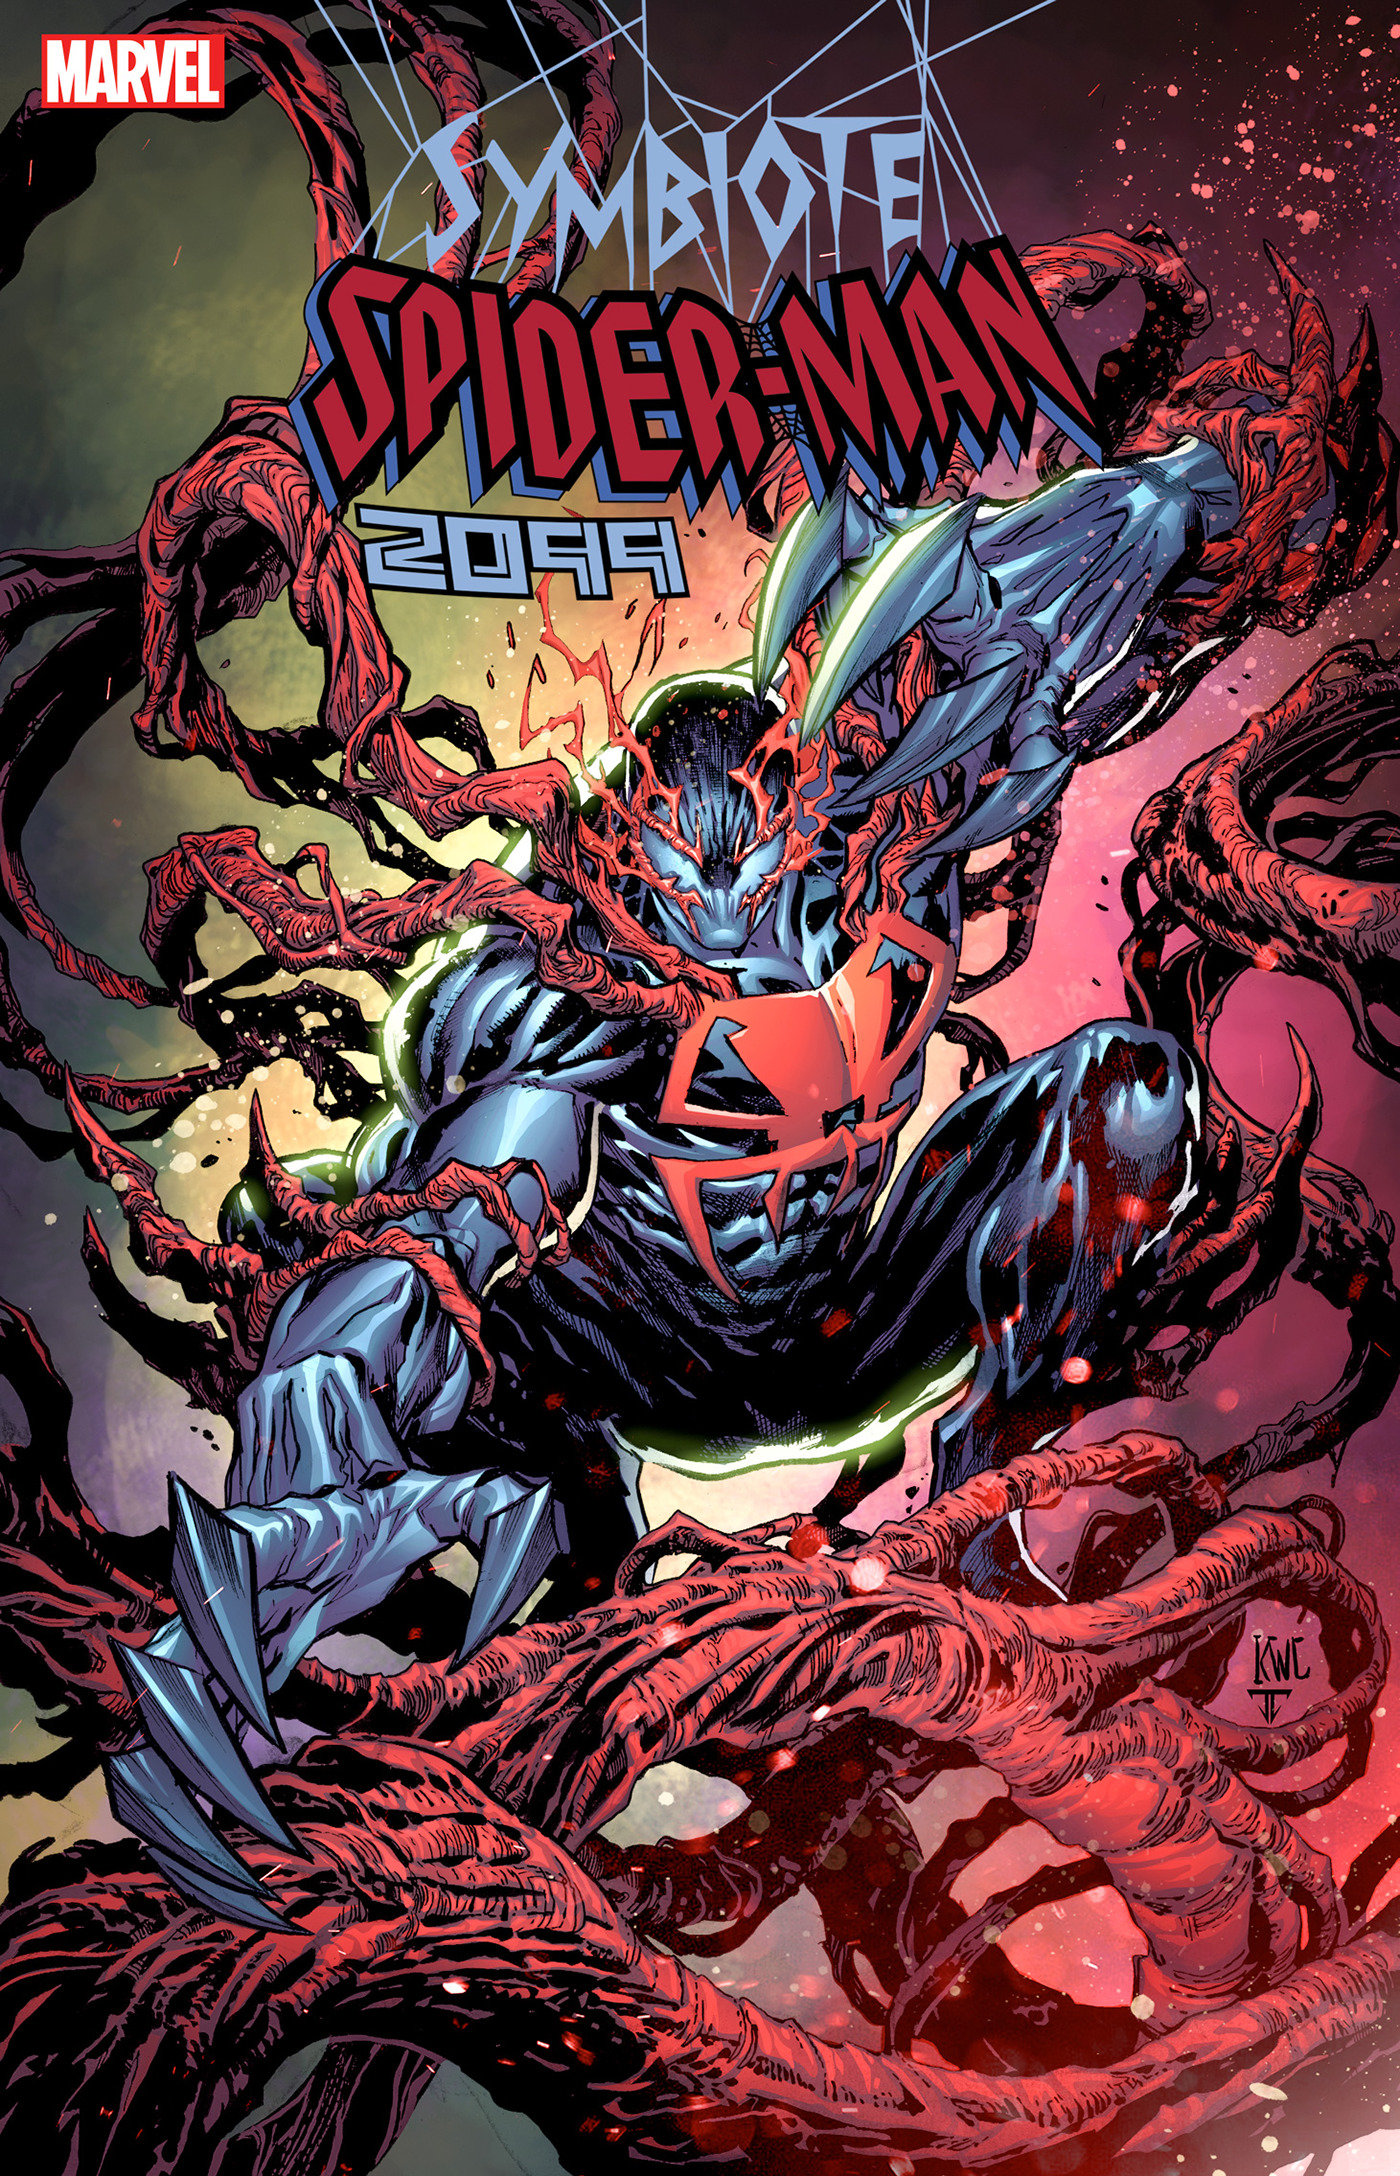 Symbiote Spider-Man 2099 #1 1 for 25 Incentive Lashley Variant (Of 5)